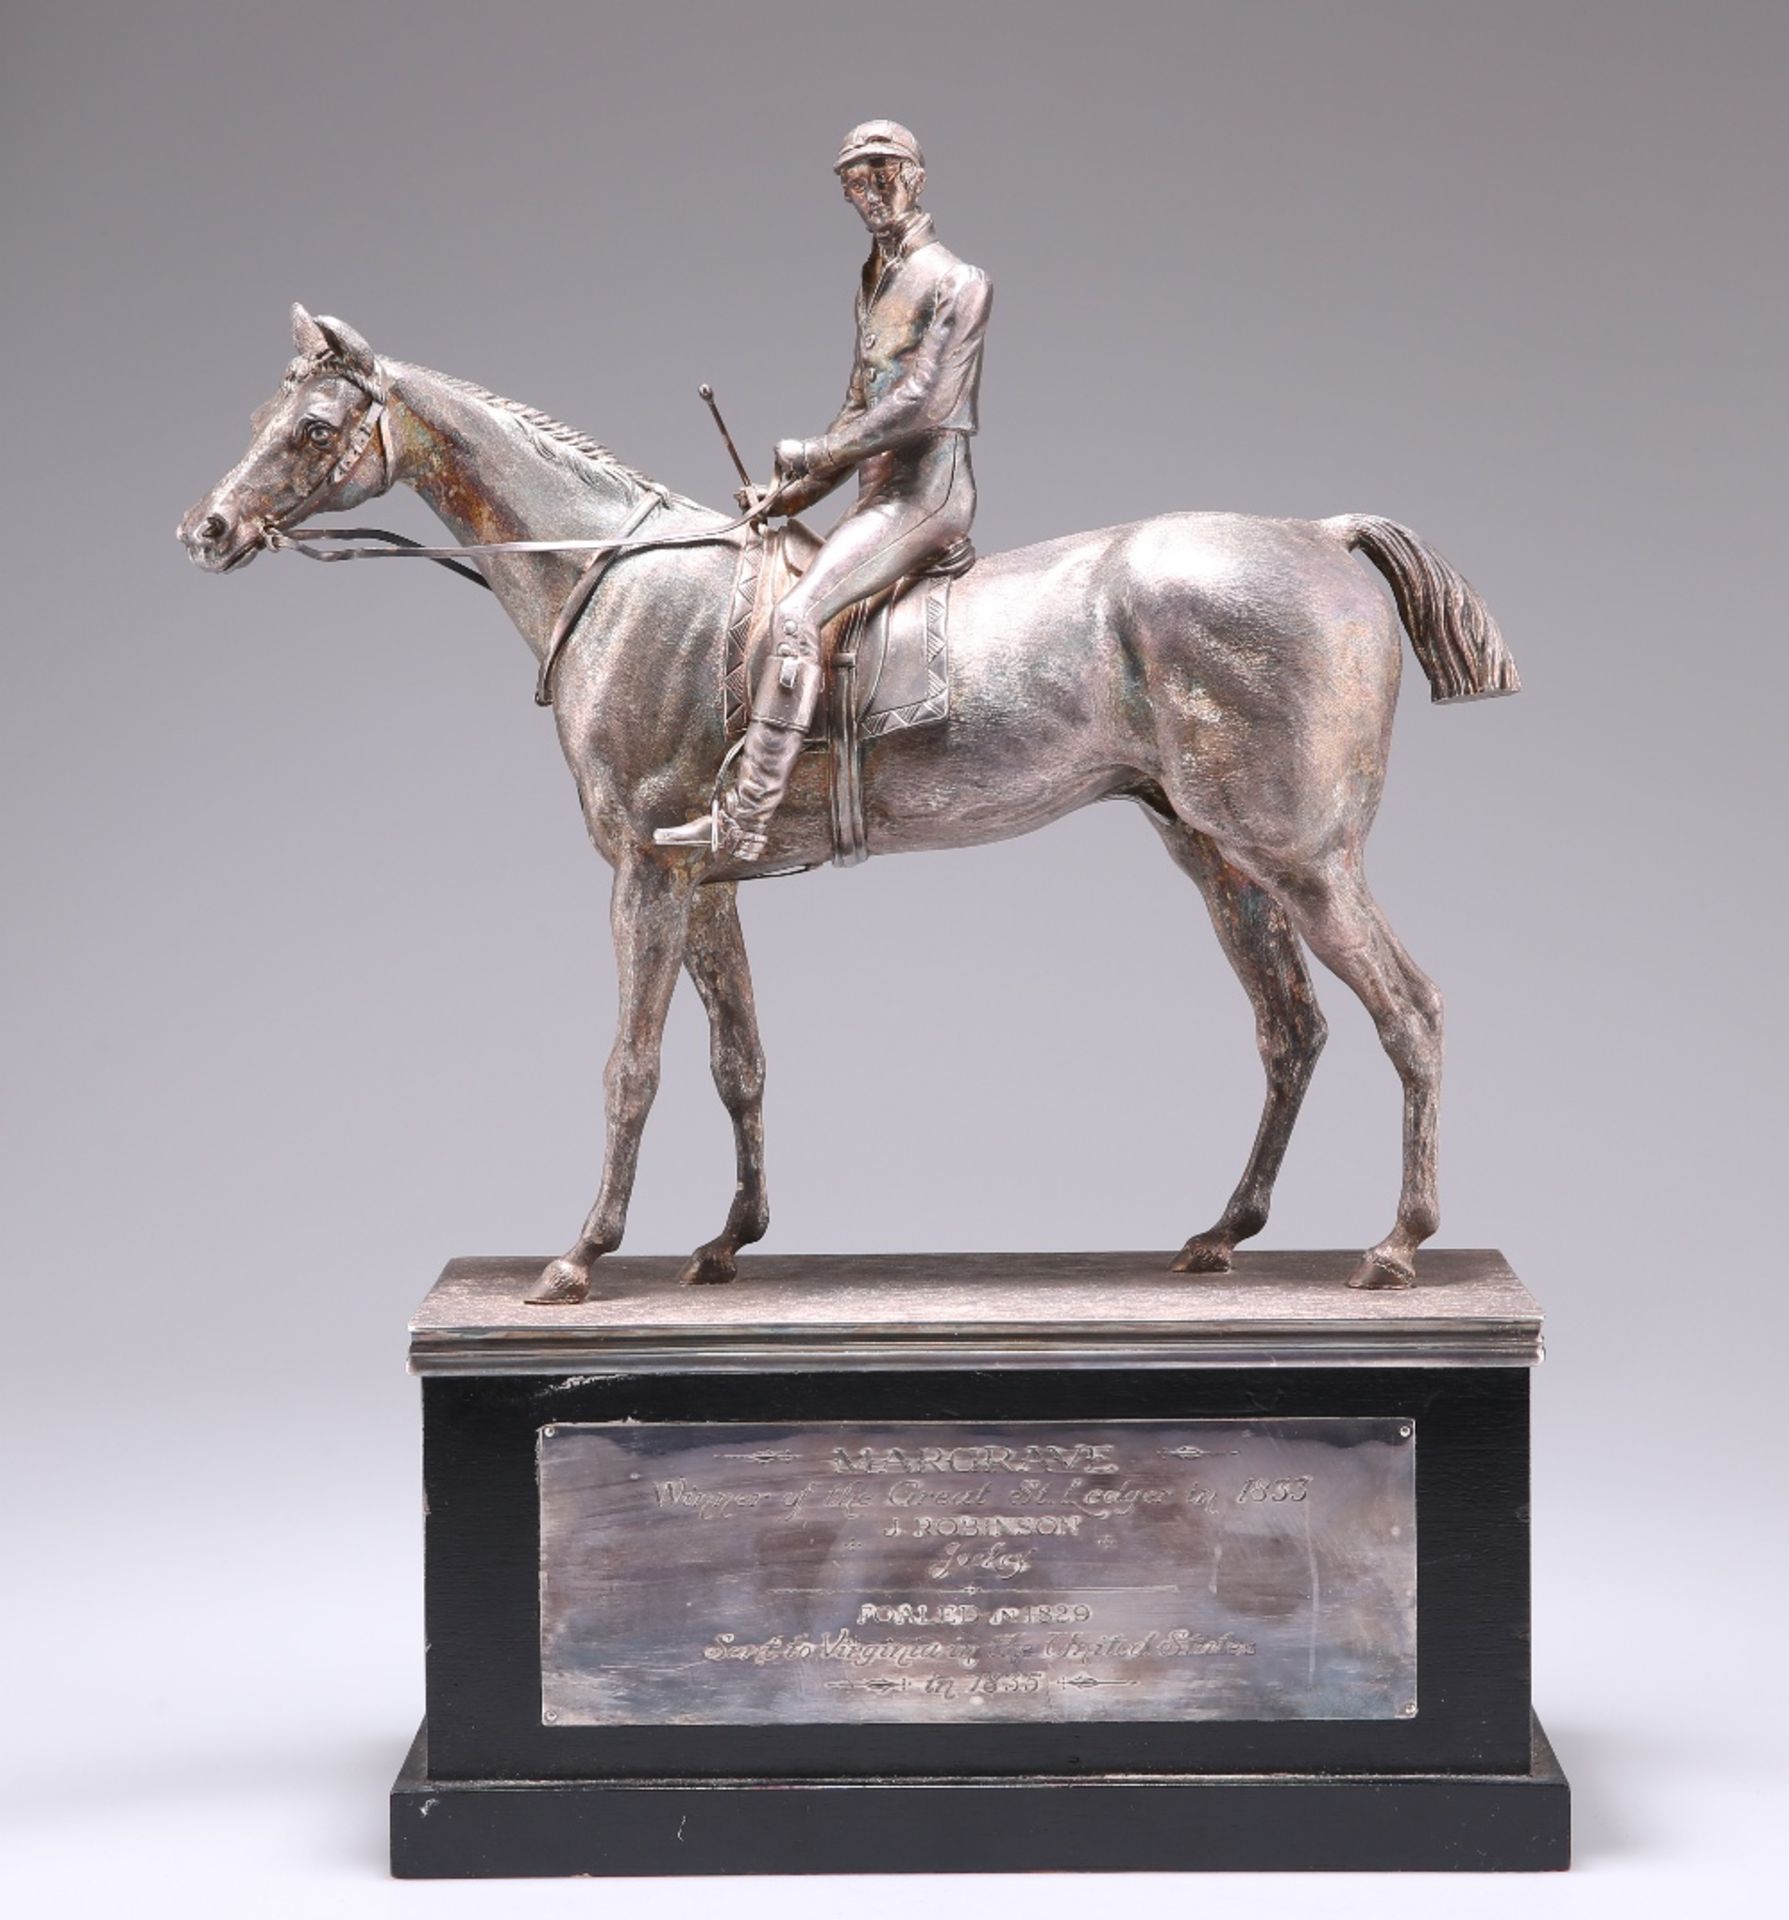 A SILVER-PLATED MODEL OF THE THOROUGHBRED RACEHORSE “MARGRAVE” WITH JOCKEY UP